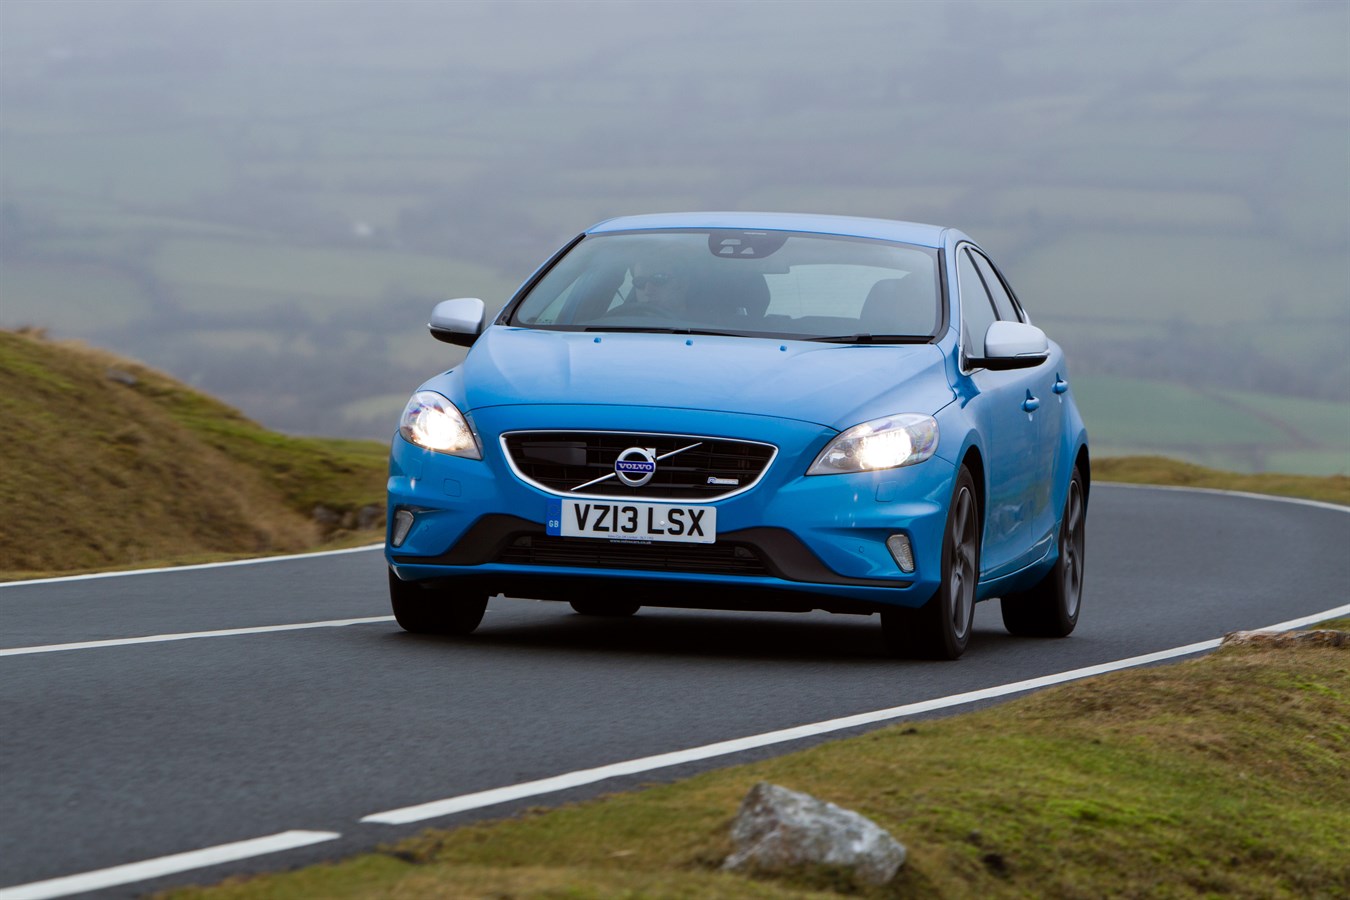 Front, 3/4 dynamic image of the all-new Volvo V40 R-Design